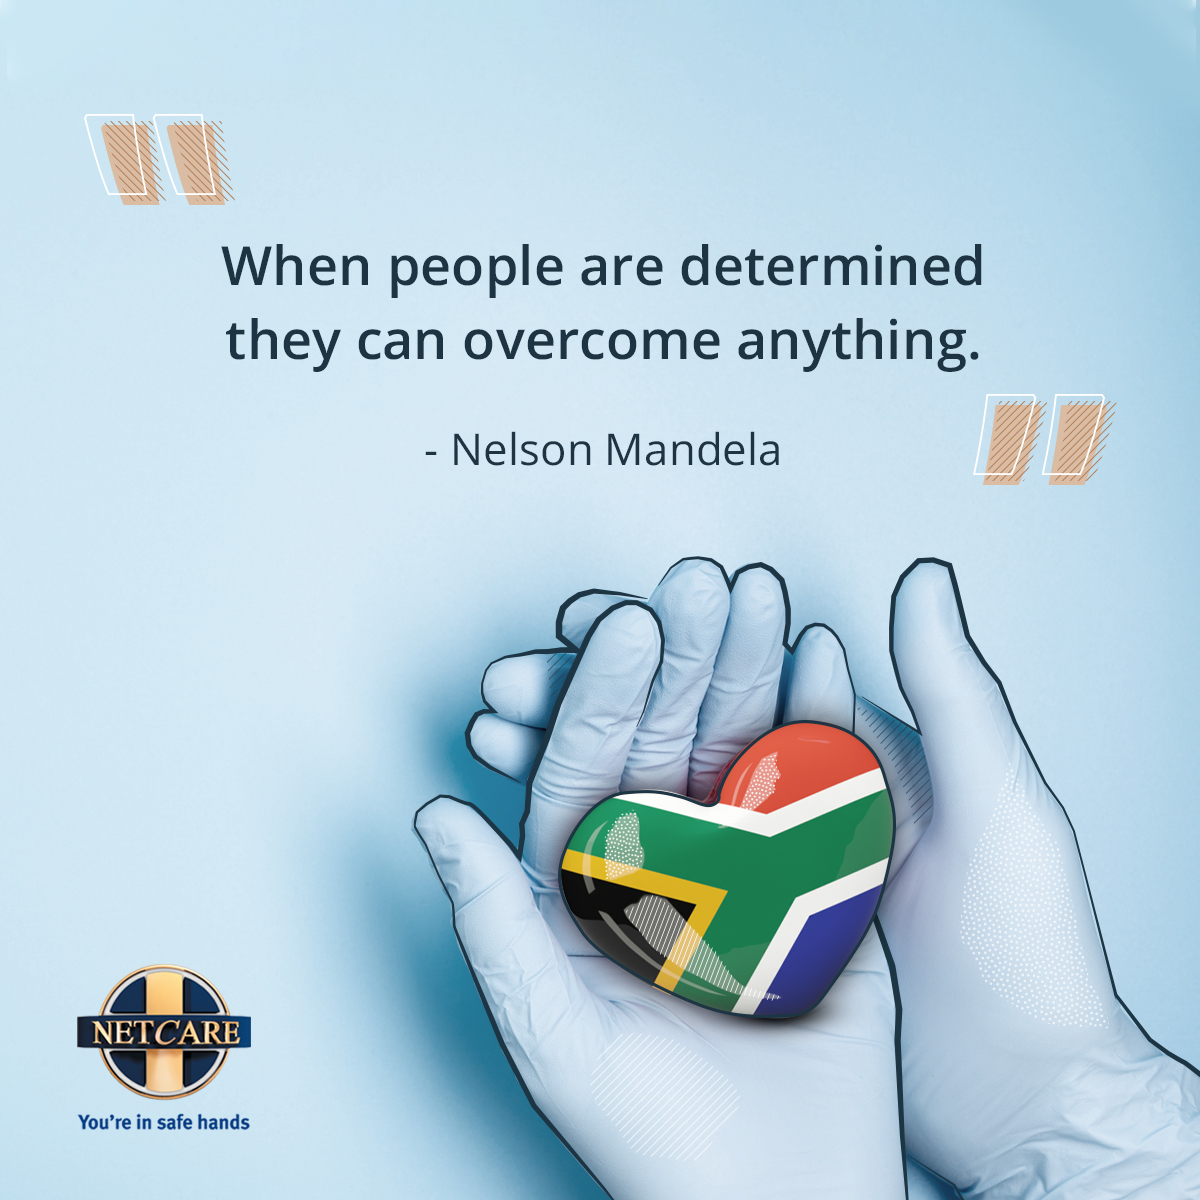 In honour of Tata Madiba and his commitment to Ubuntu, let’s continue to do our part and help keep each other safe, not only today but every day. In true Ubuntu spirit – I am because you are. #MandelaDay